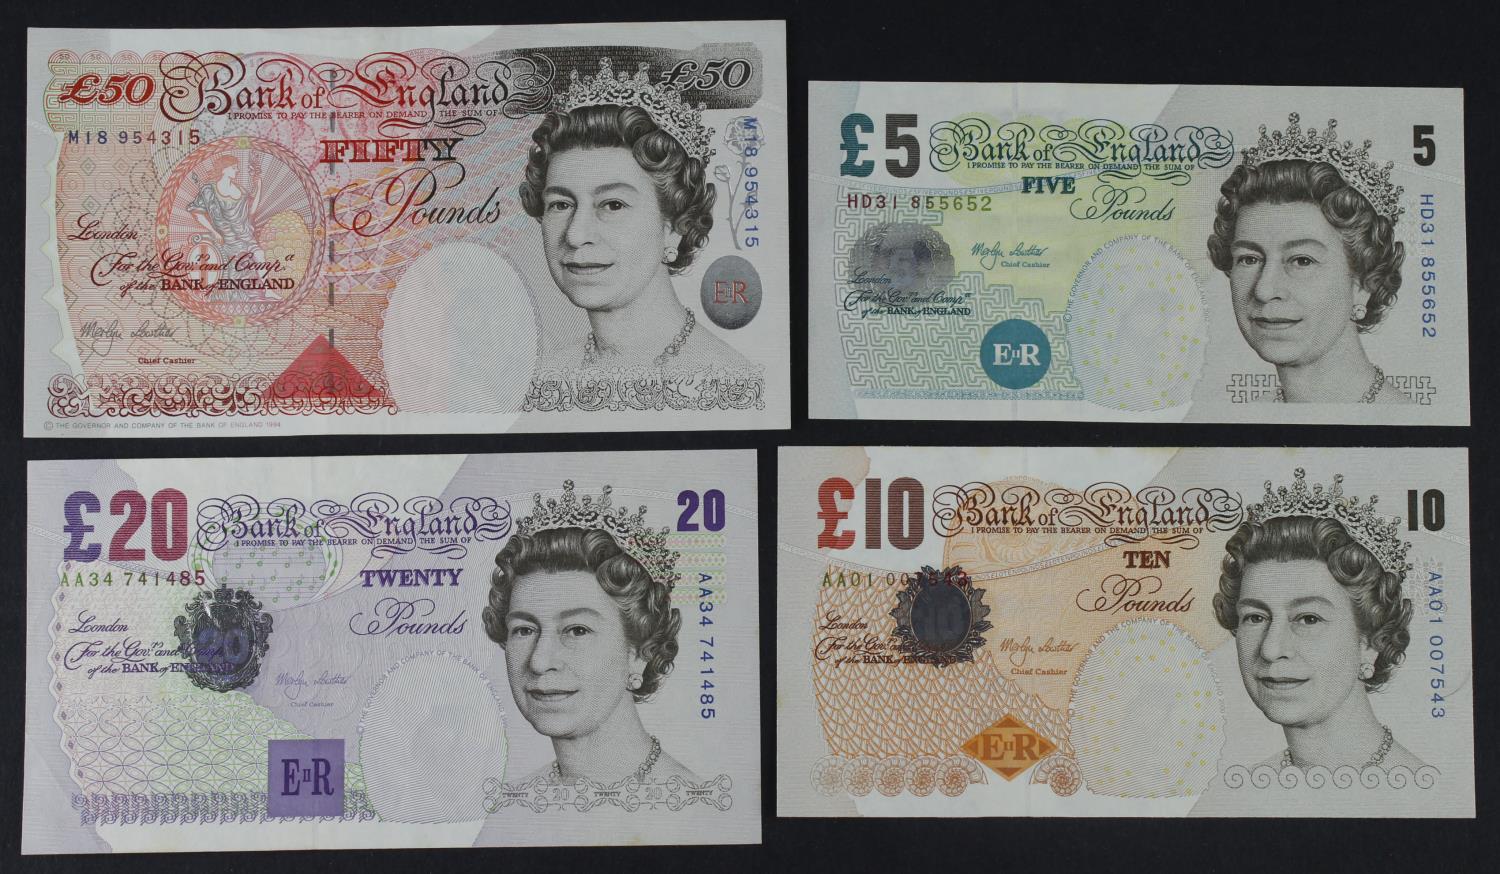 Lowther (4), 50 Pounds issued 1999, serial M18 954315 (B385, Pick388b) EF, 20 Pounds issued 1999,